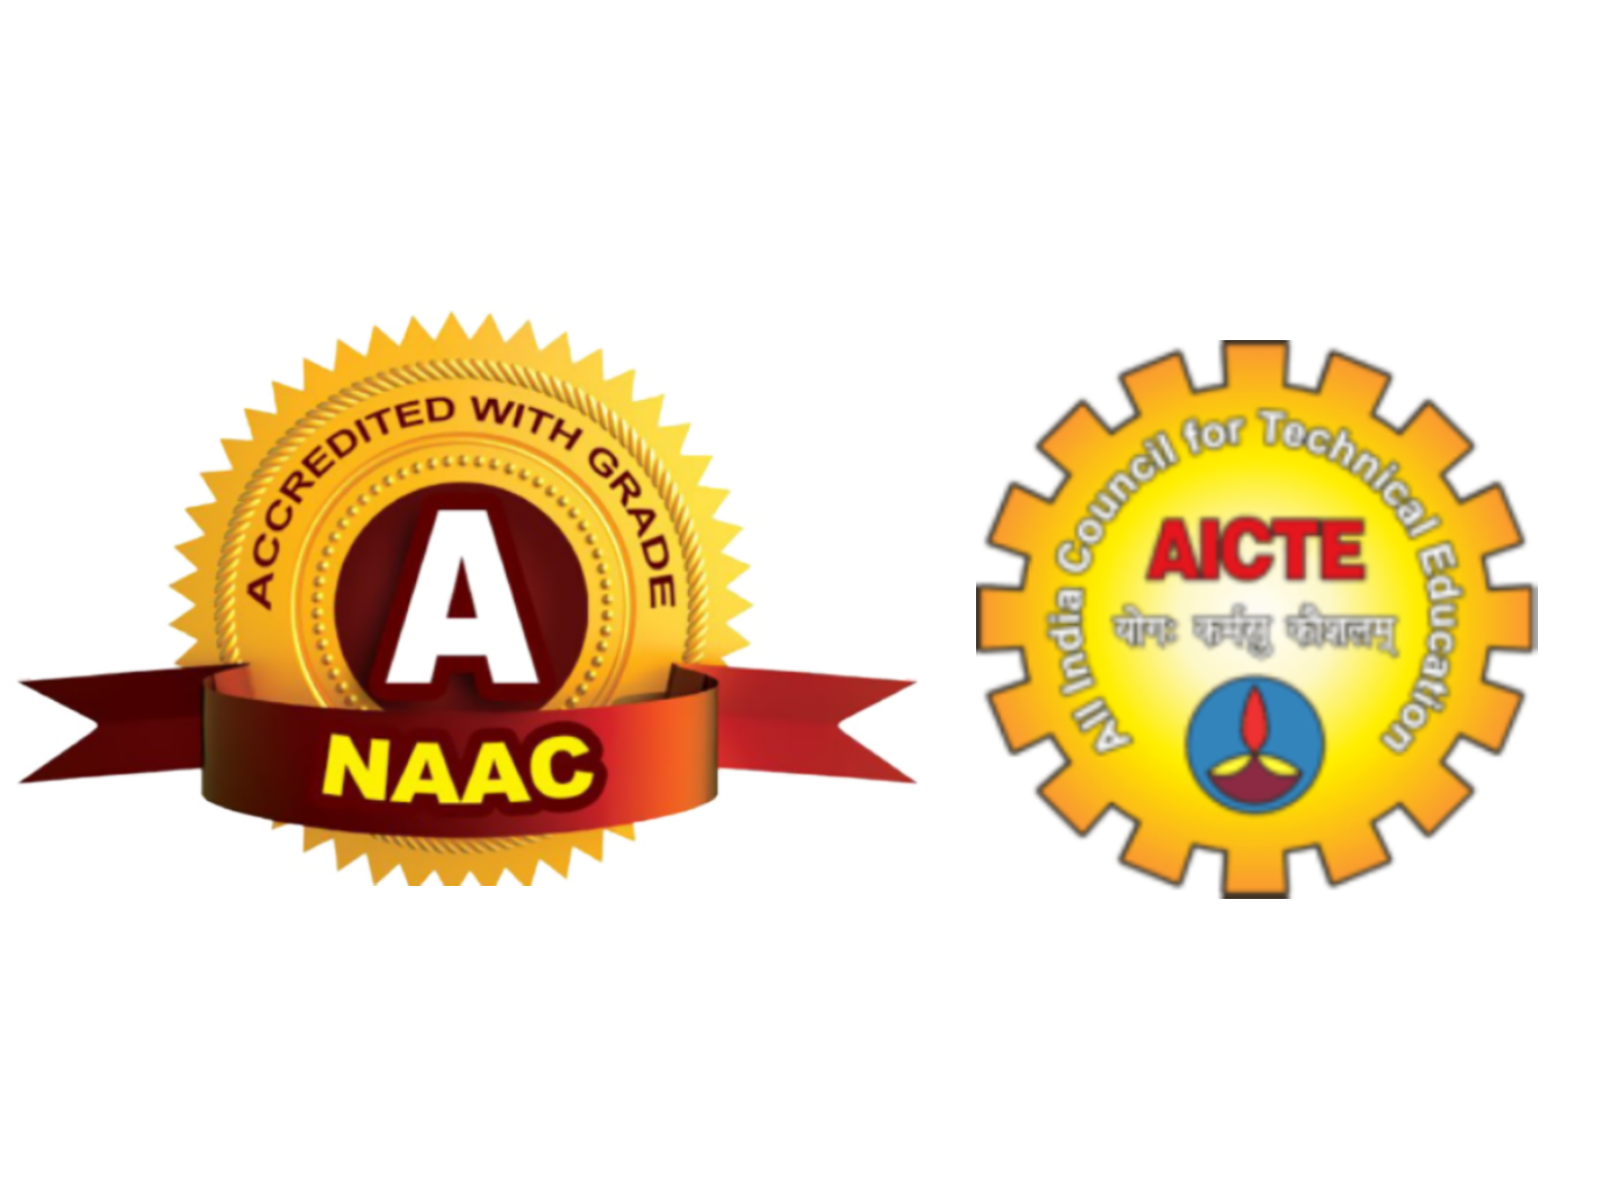 Accredited by NAAC